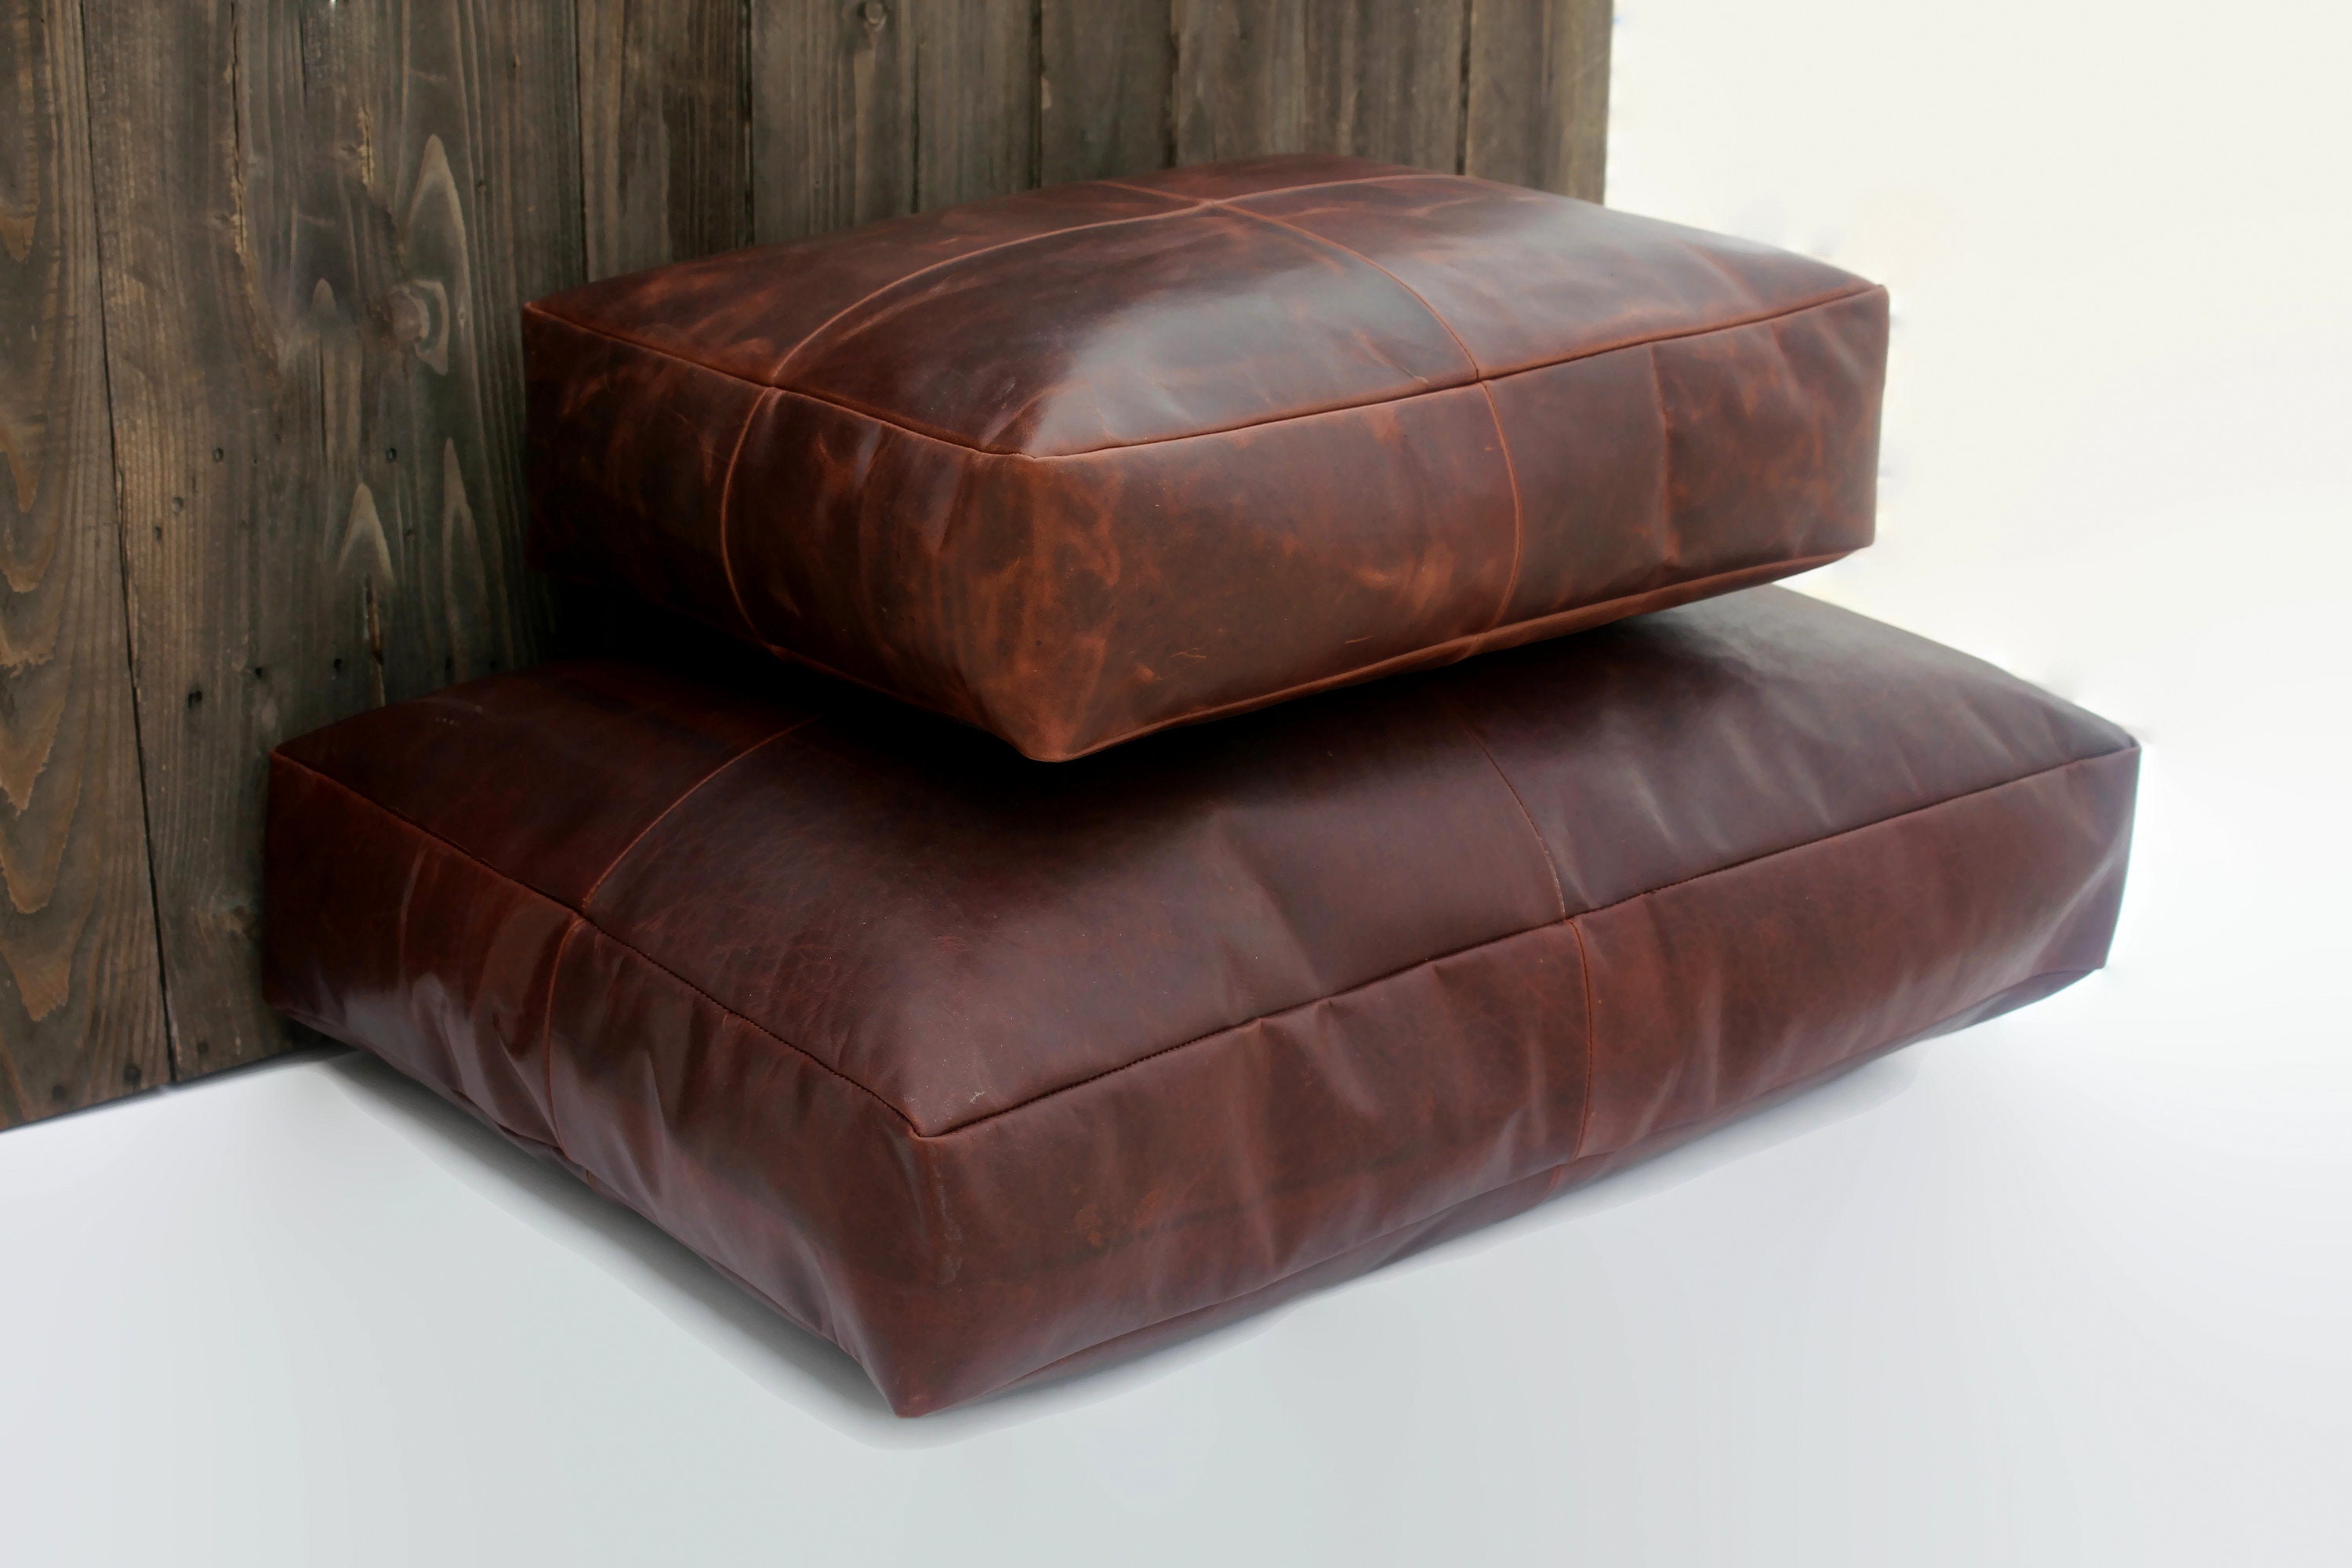 Custom Leather Cushions, Piped Cushion, Morris Chair Cushions, Genuine  Leather, Made to Order and Size, Choose Color, Brown, Grey, Tan, Navy 